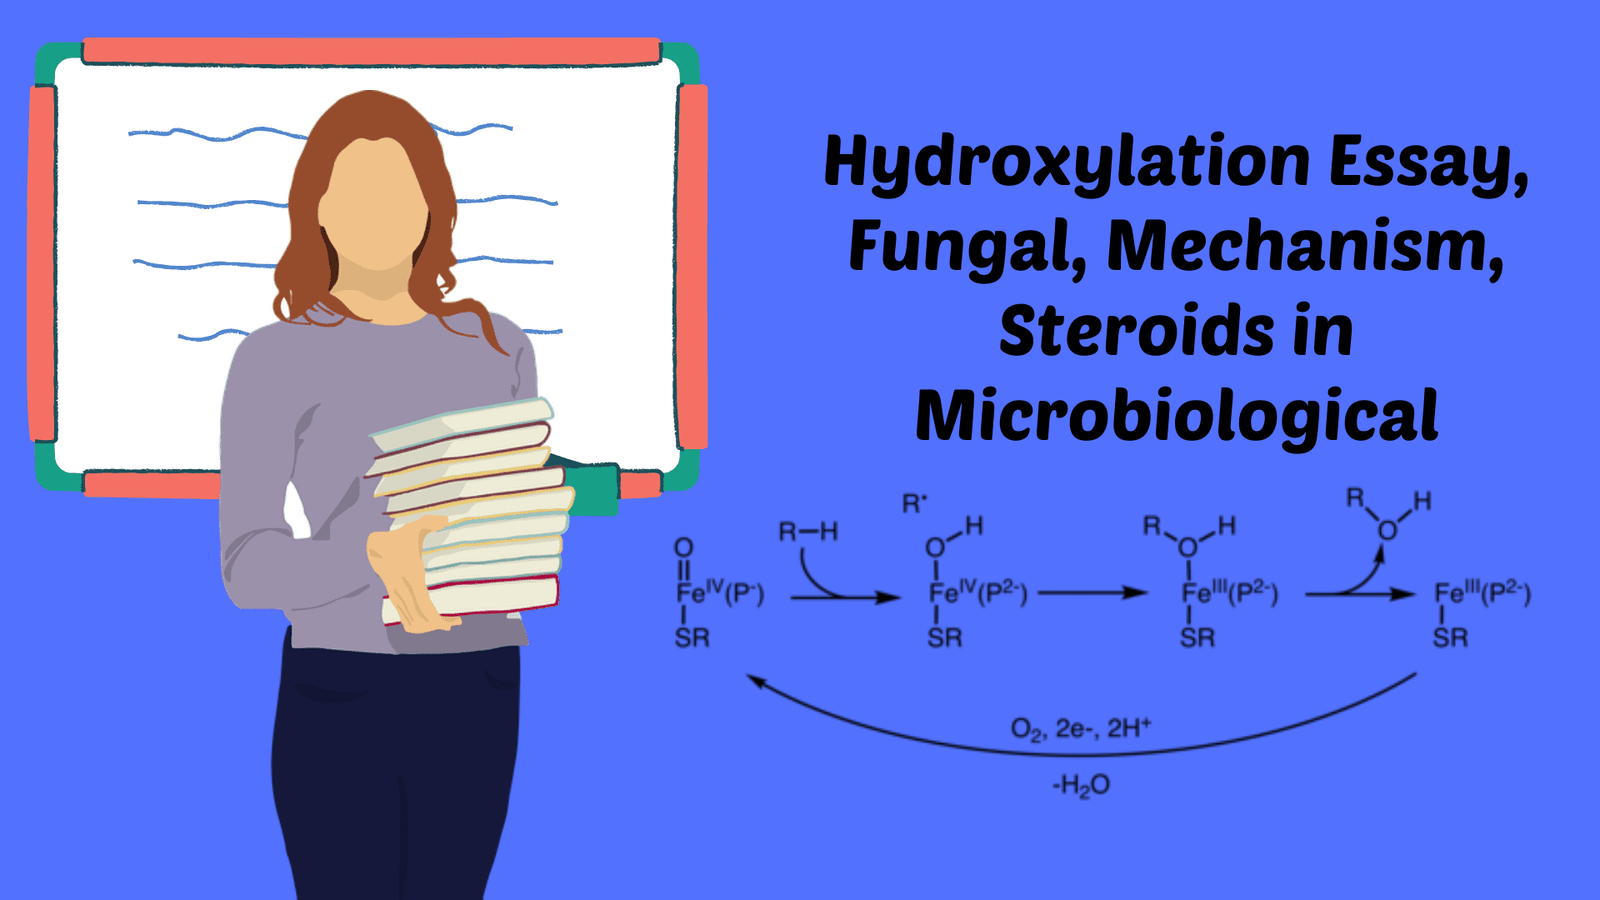 Hydroxylation Essay Fungal Mechanism Steroids in Microbiological Image